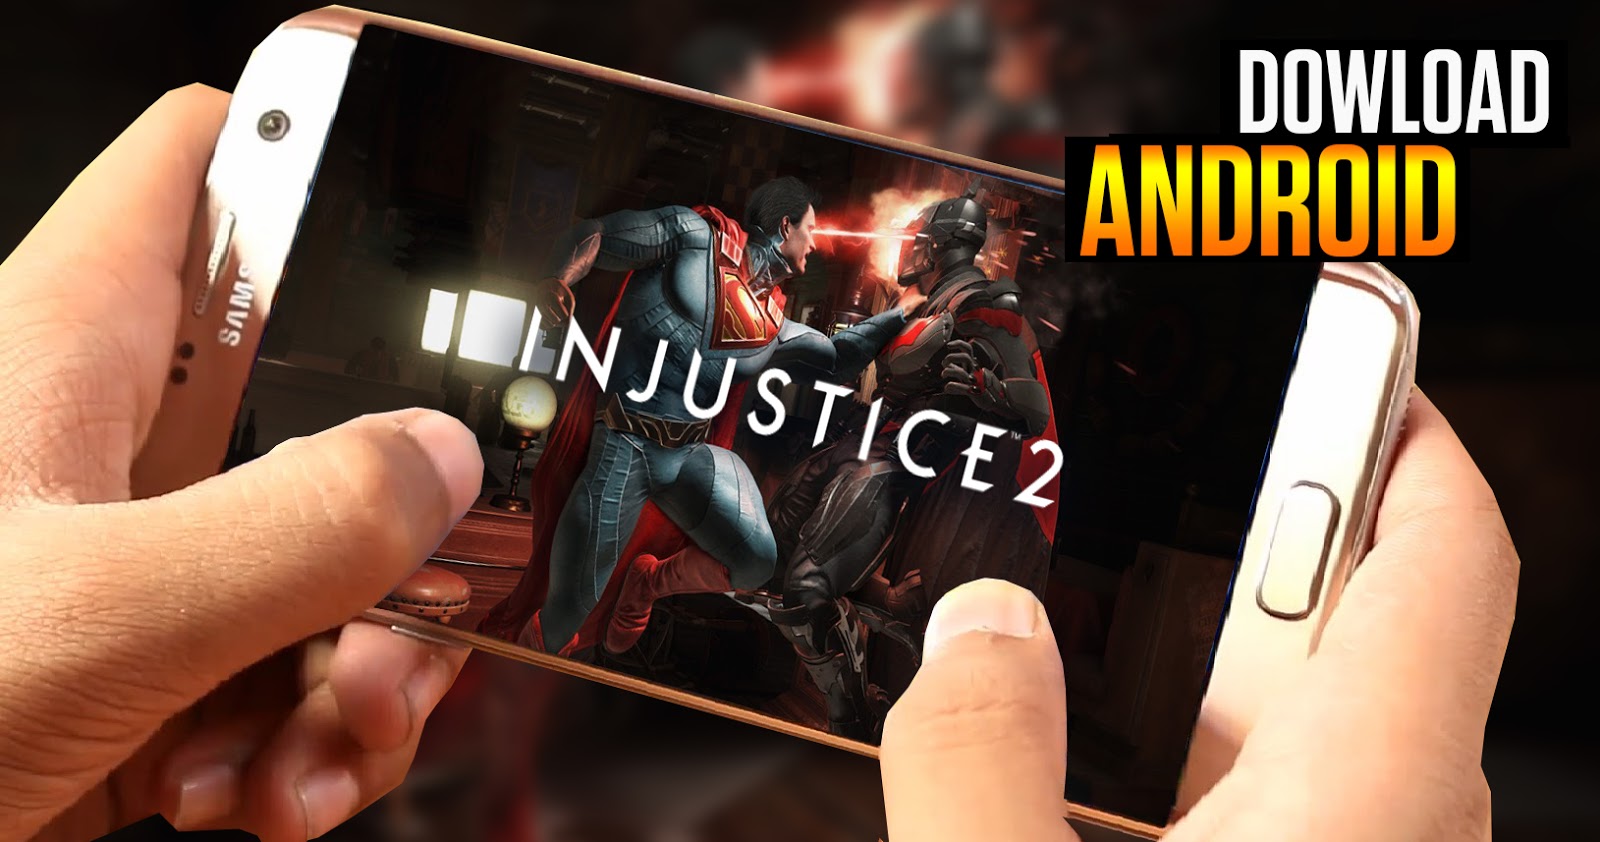 [HACK] Injustice 2 Android AAA